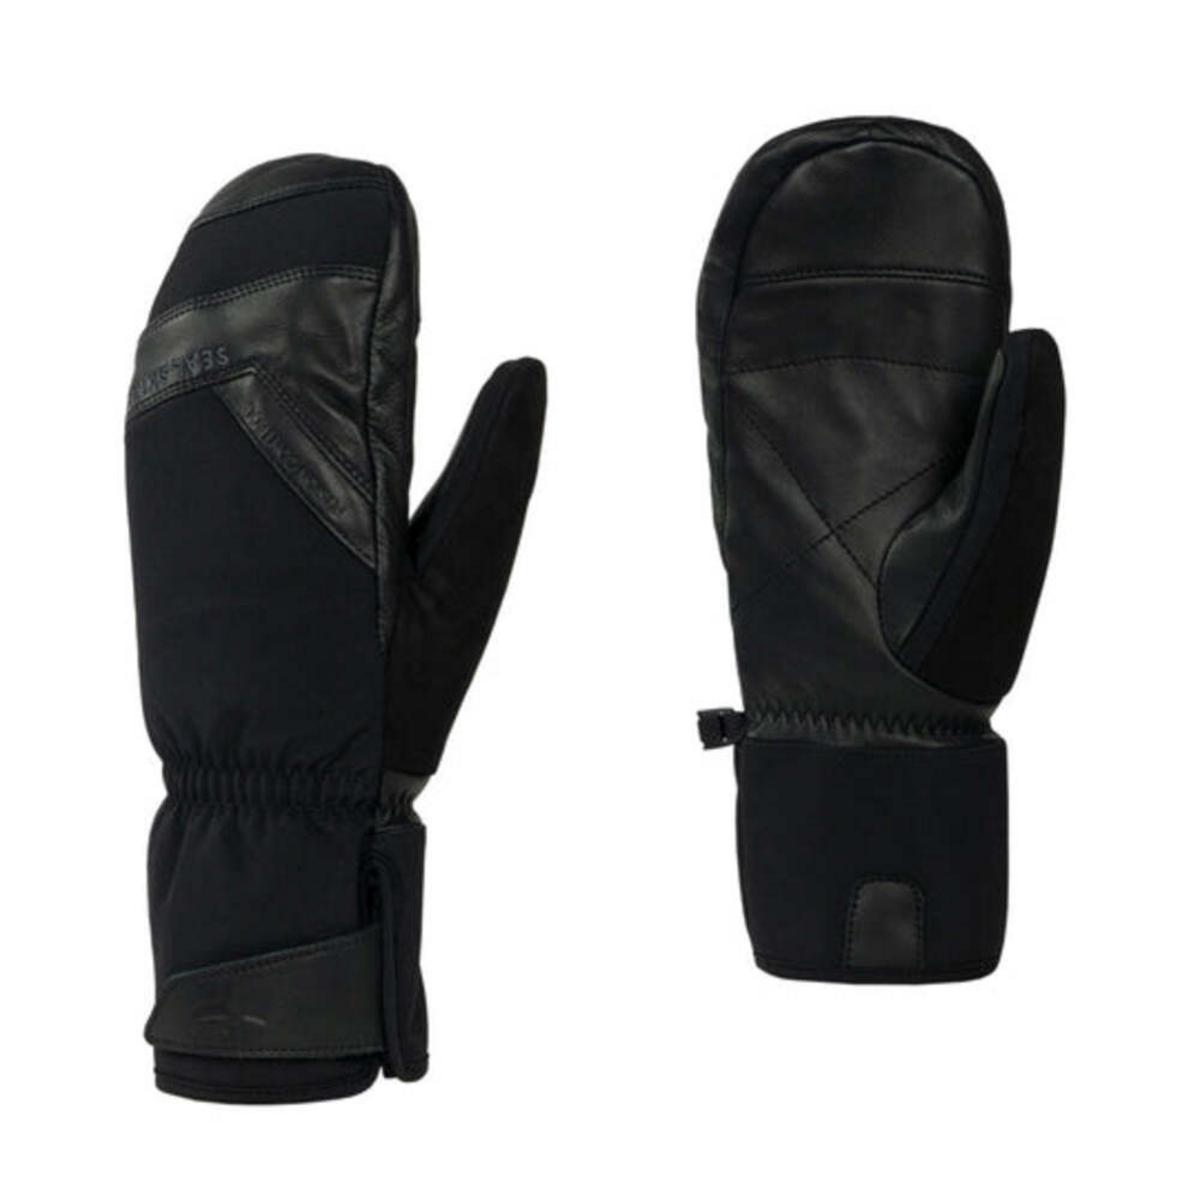 SealSkinz Swaffham Waterproof Extreme Cold Weather Insulated Finger-Mittens with Fusion Control